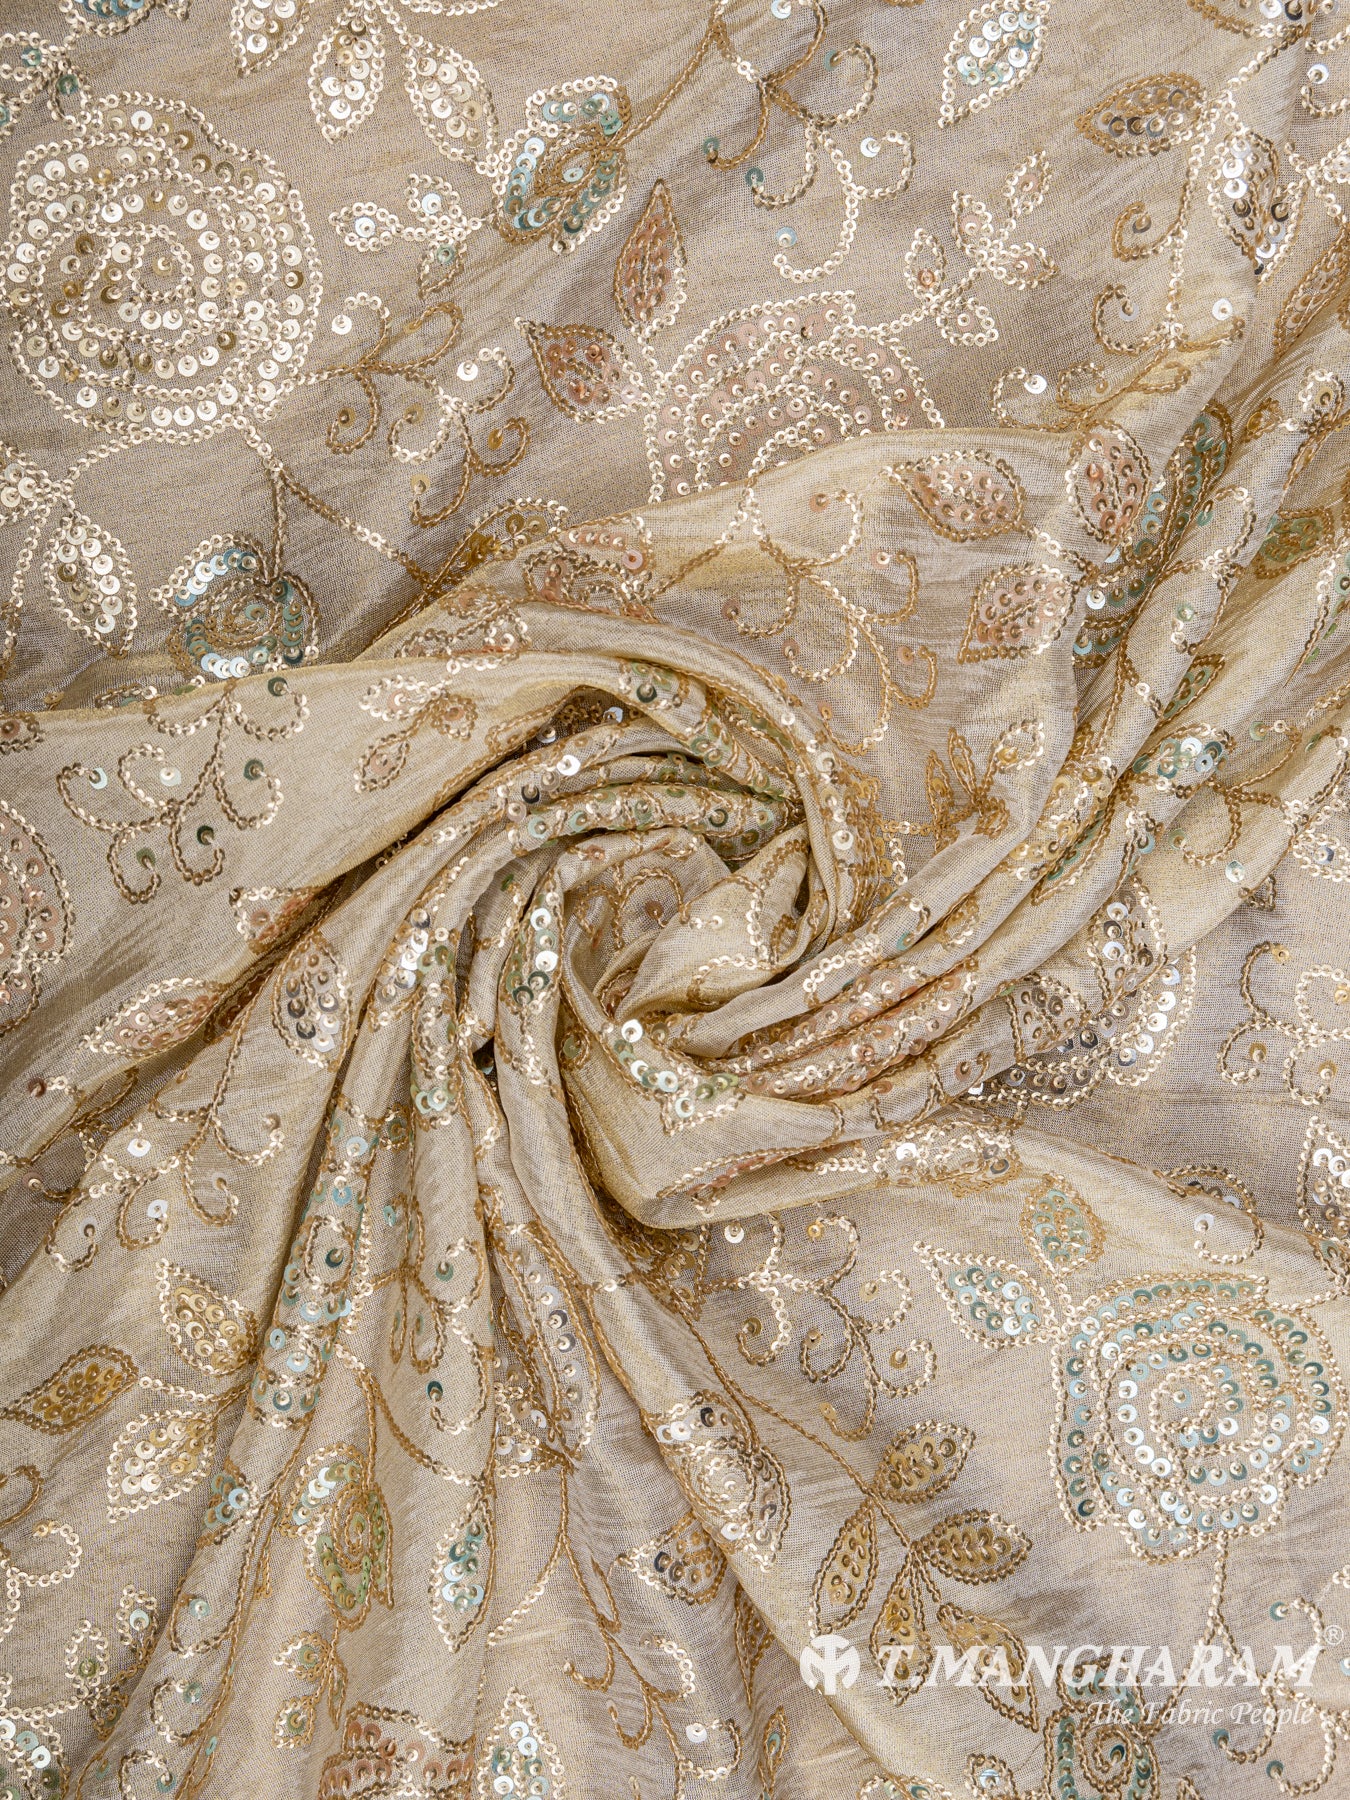 Beige Tissue Embroidery Fabric - EB4874 view-1